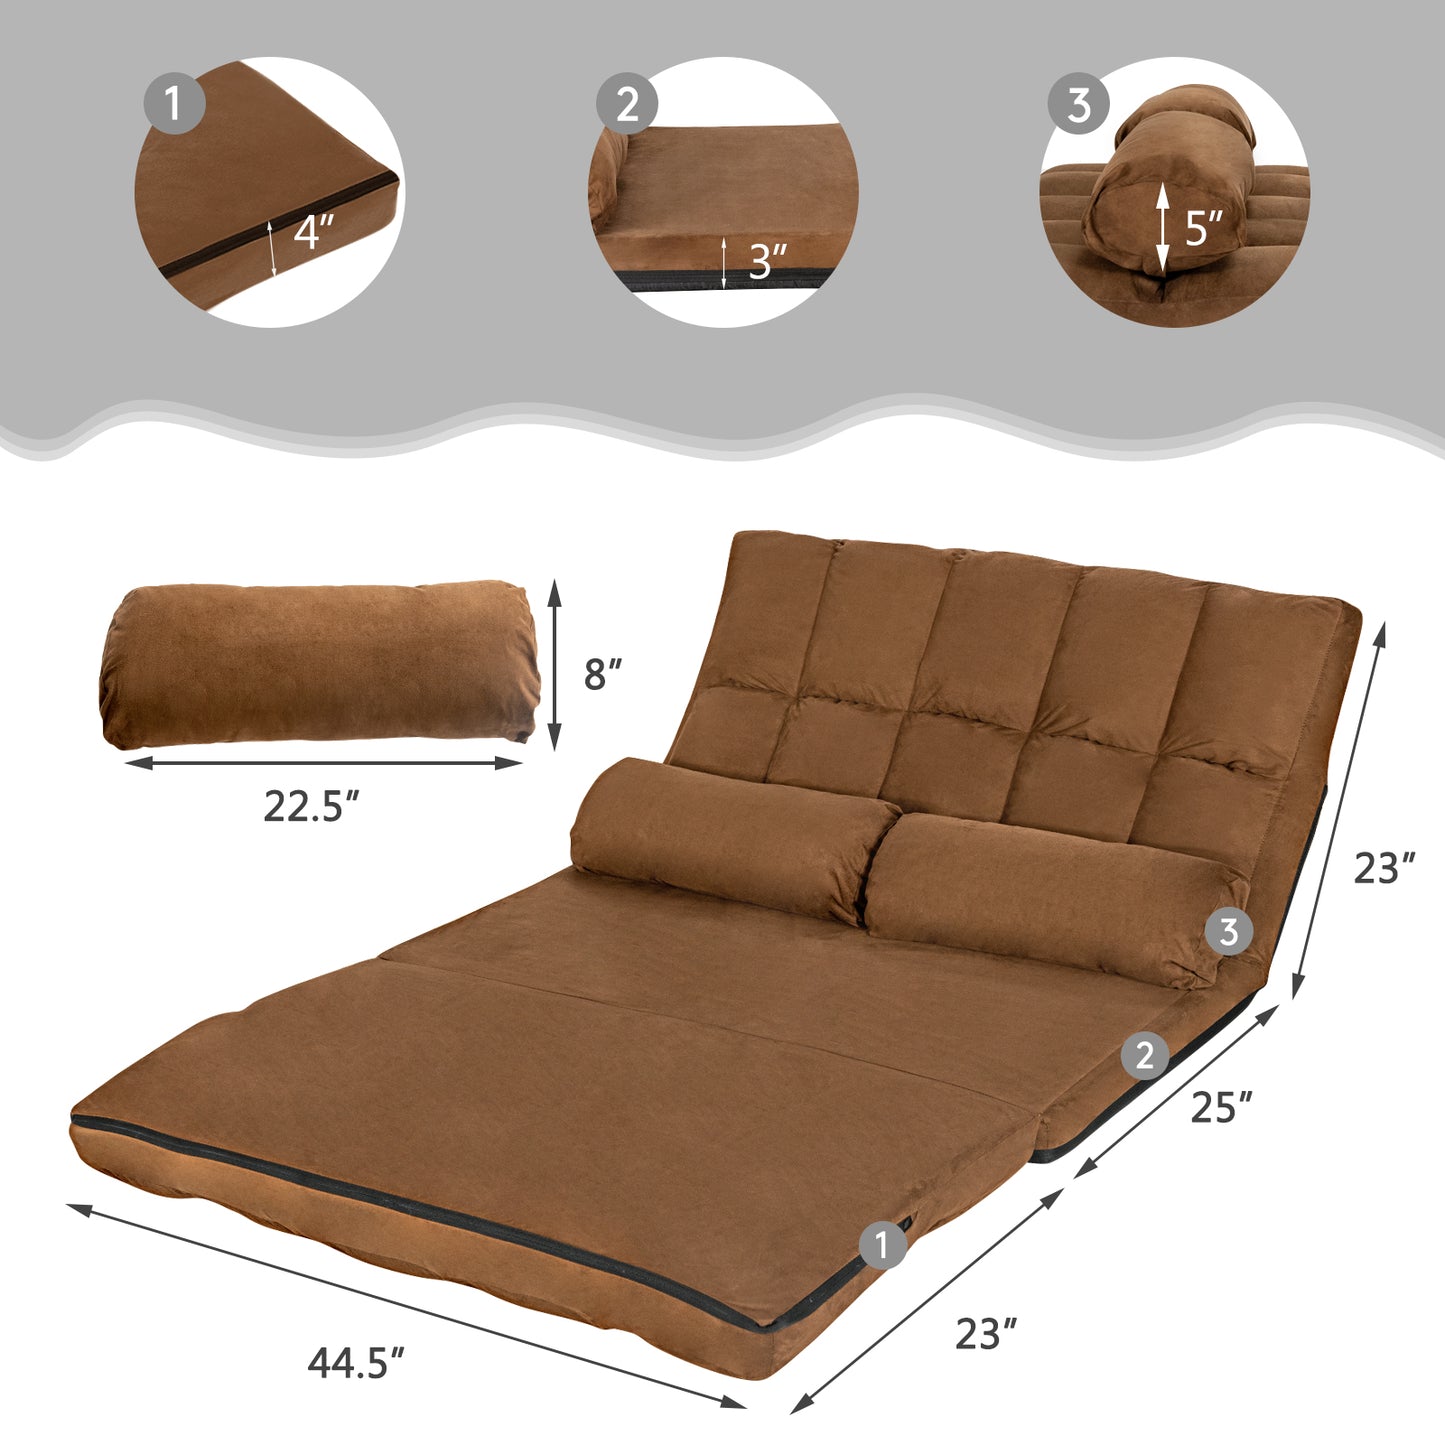 Foldable Floor 6-Position Adjustable Lounge Couch-Brown